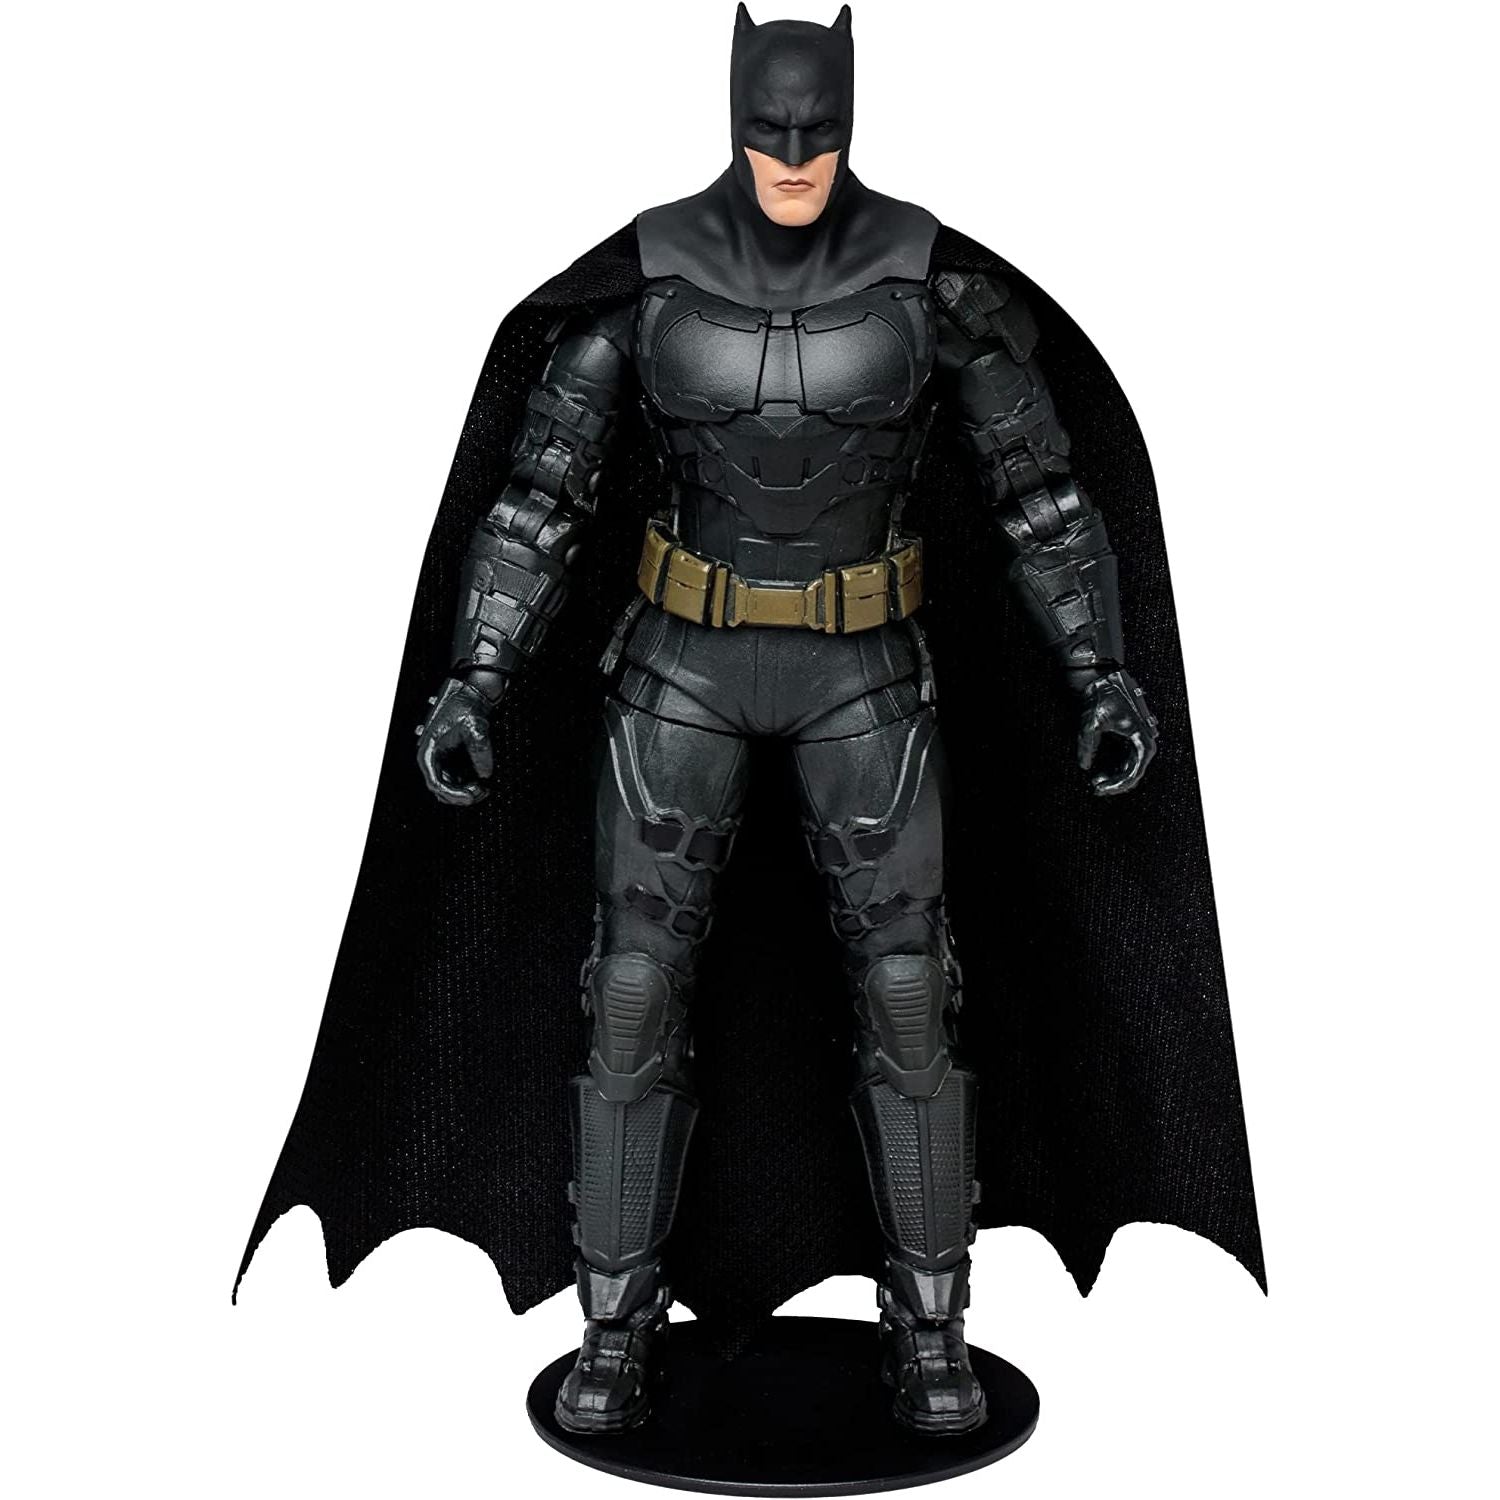 DC Multiverse - The Flash Movie - The Batman Action Figure Toy 7-INCH front pose - Heretoserveyou